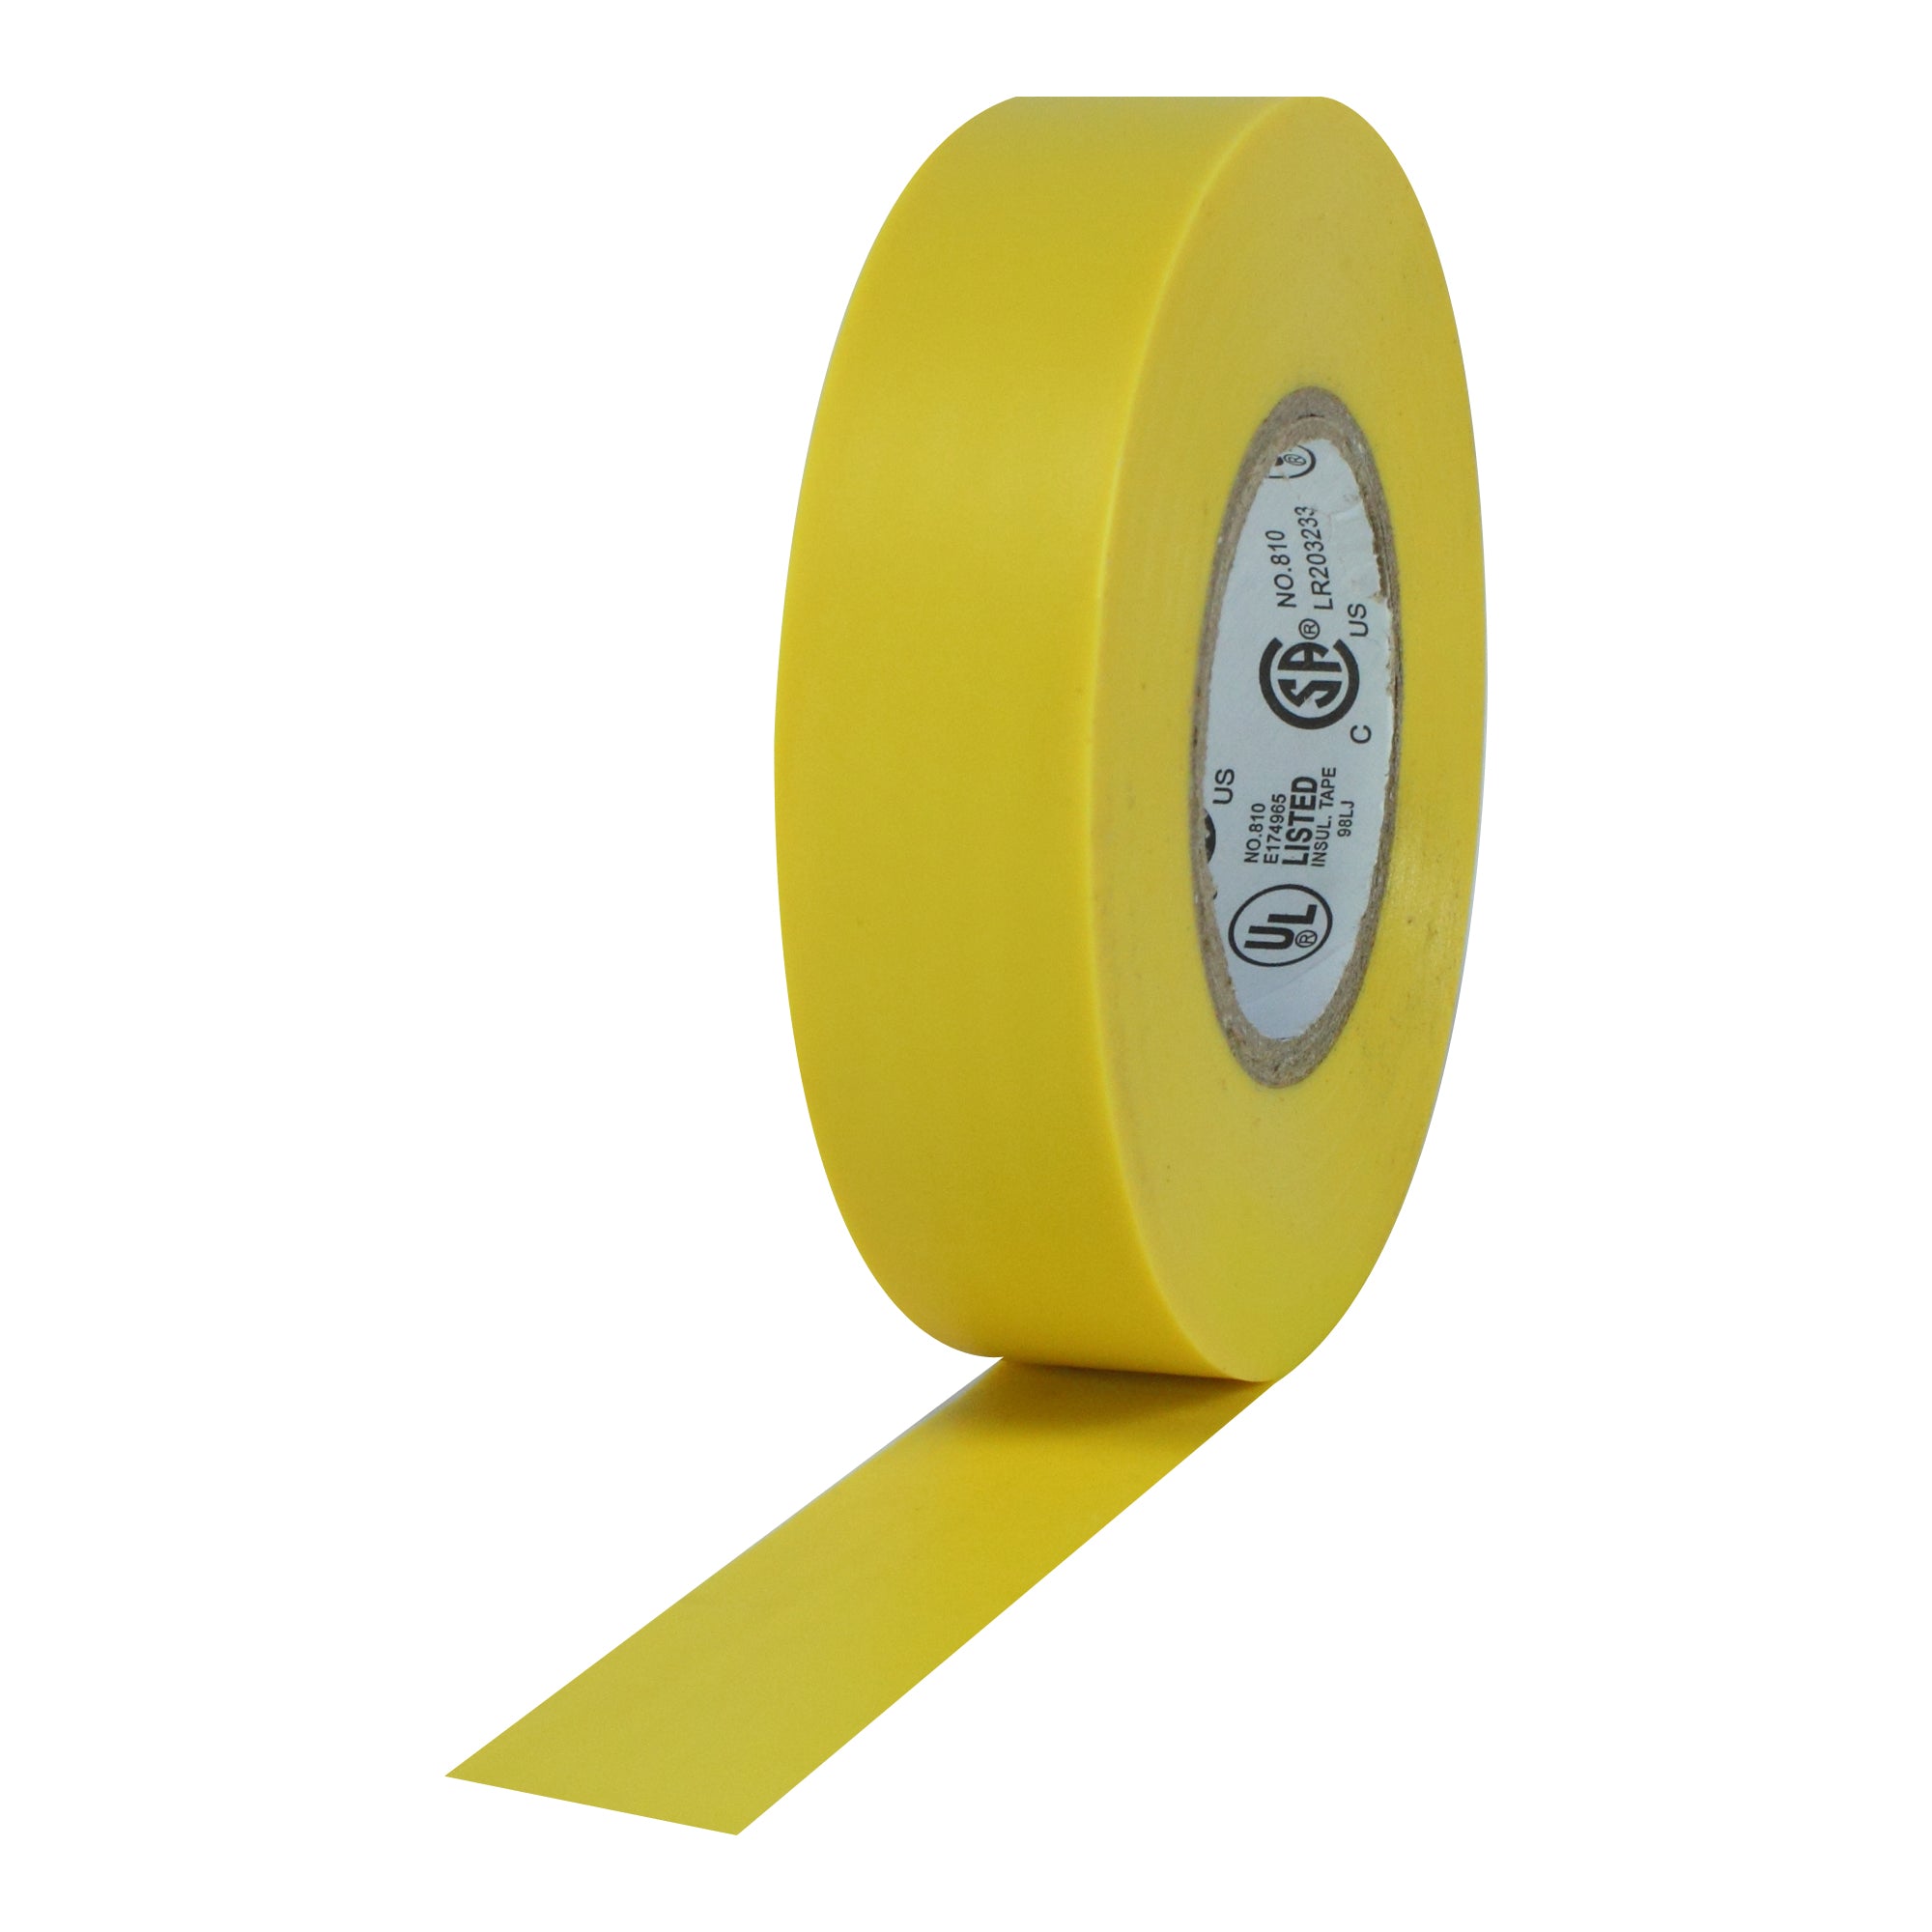 Pro Tapes Pro Plus Electrical Tape - 3/4" x 60', Yellow